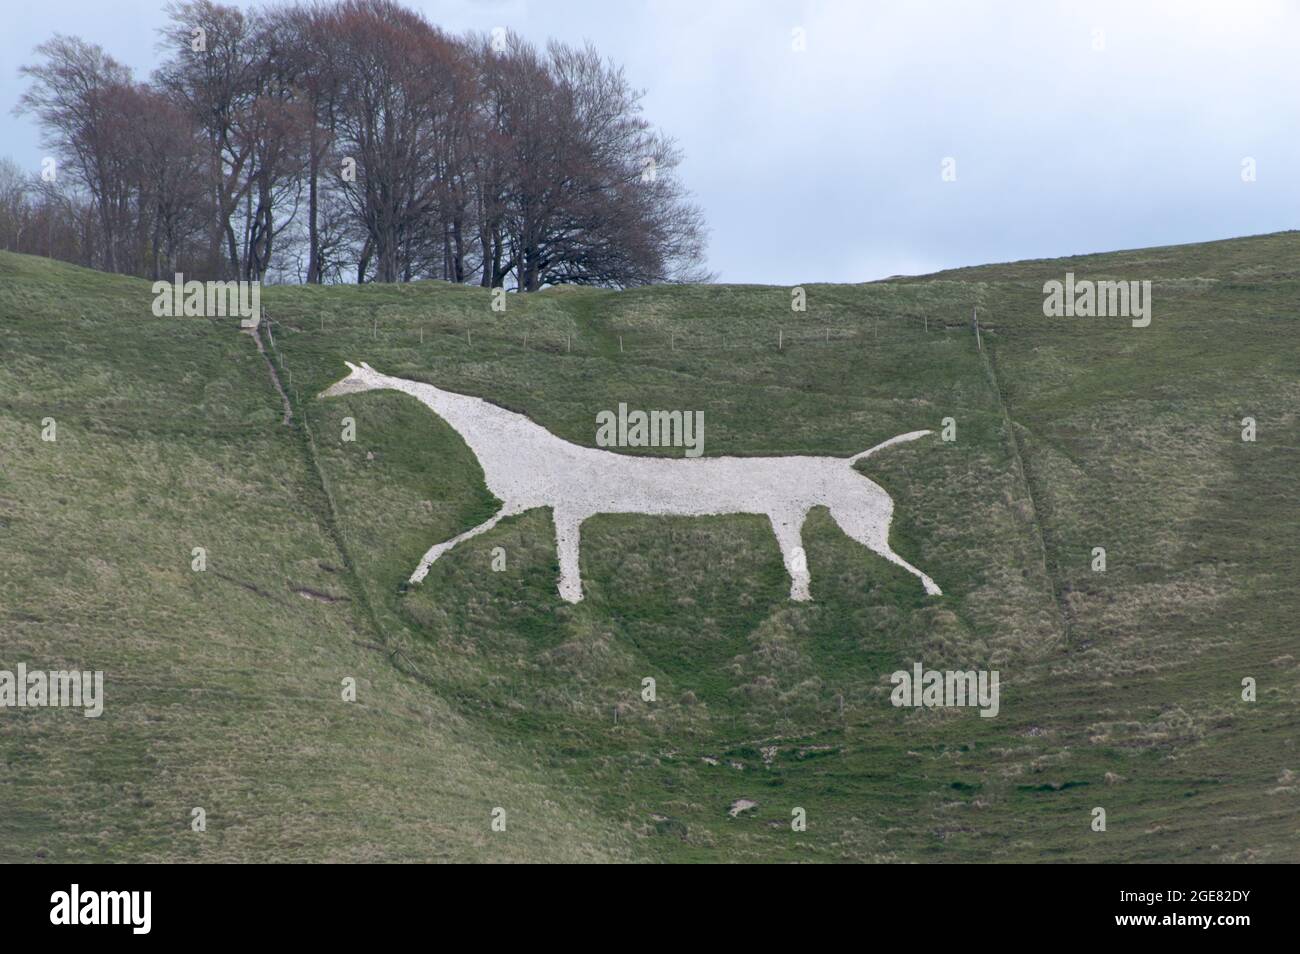 AVEBURY, UNITED KINGDOM - Apr 30, 2016: One of the many white horses that are carved in Wiltshire's countryside. Stock Photo